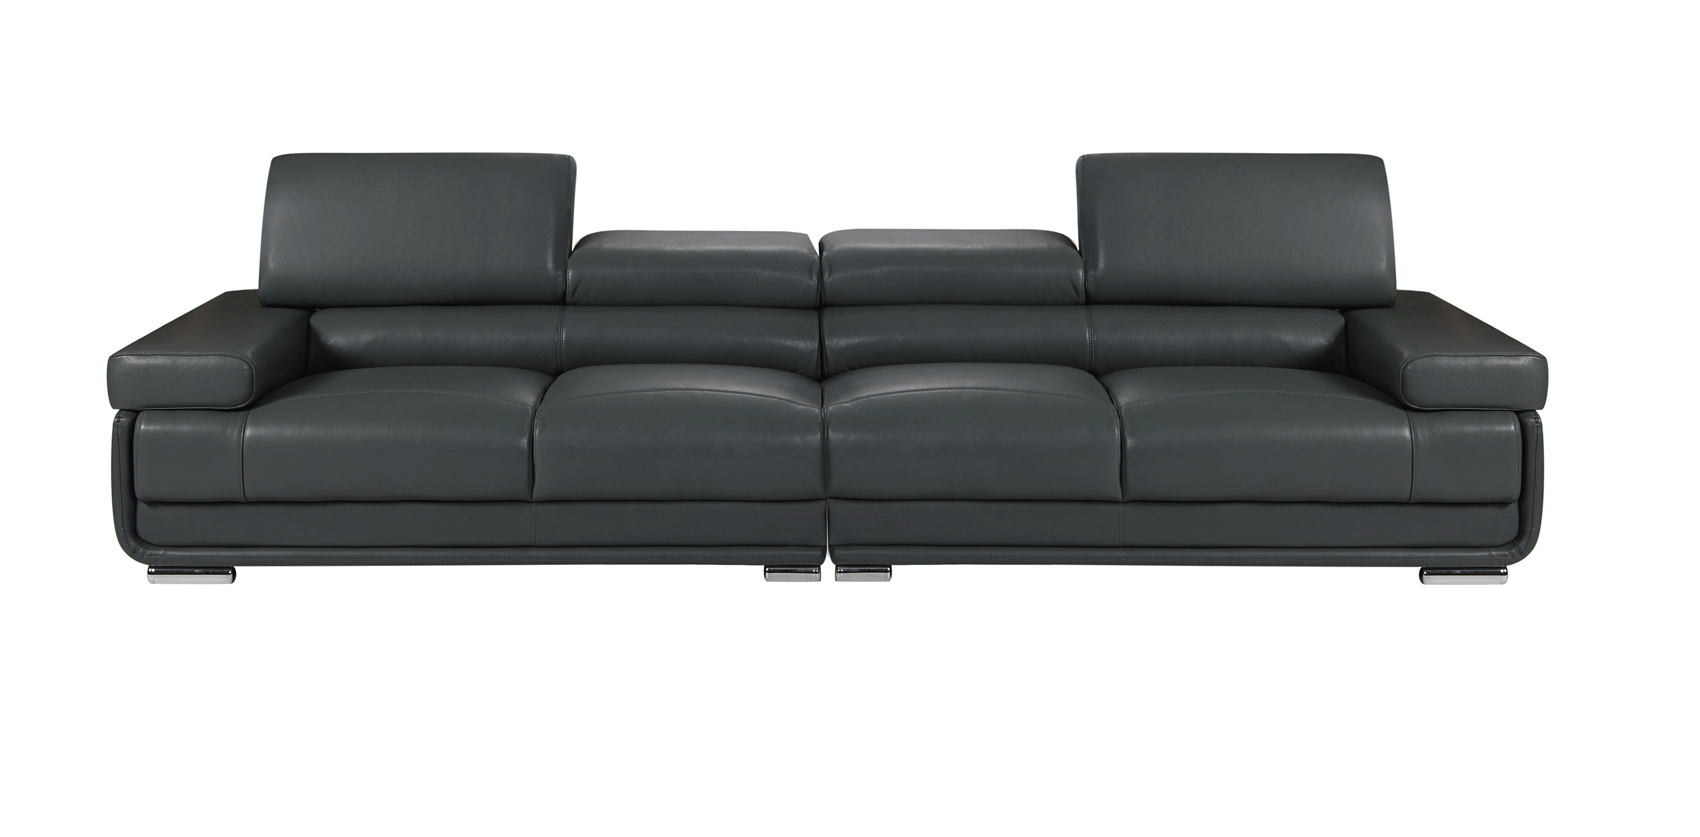 Brands WCH Modern Living Special Order 2119 Sofa, Loveseat, Chair